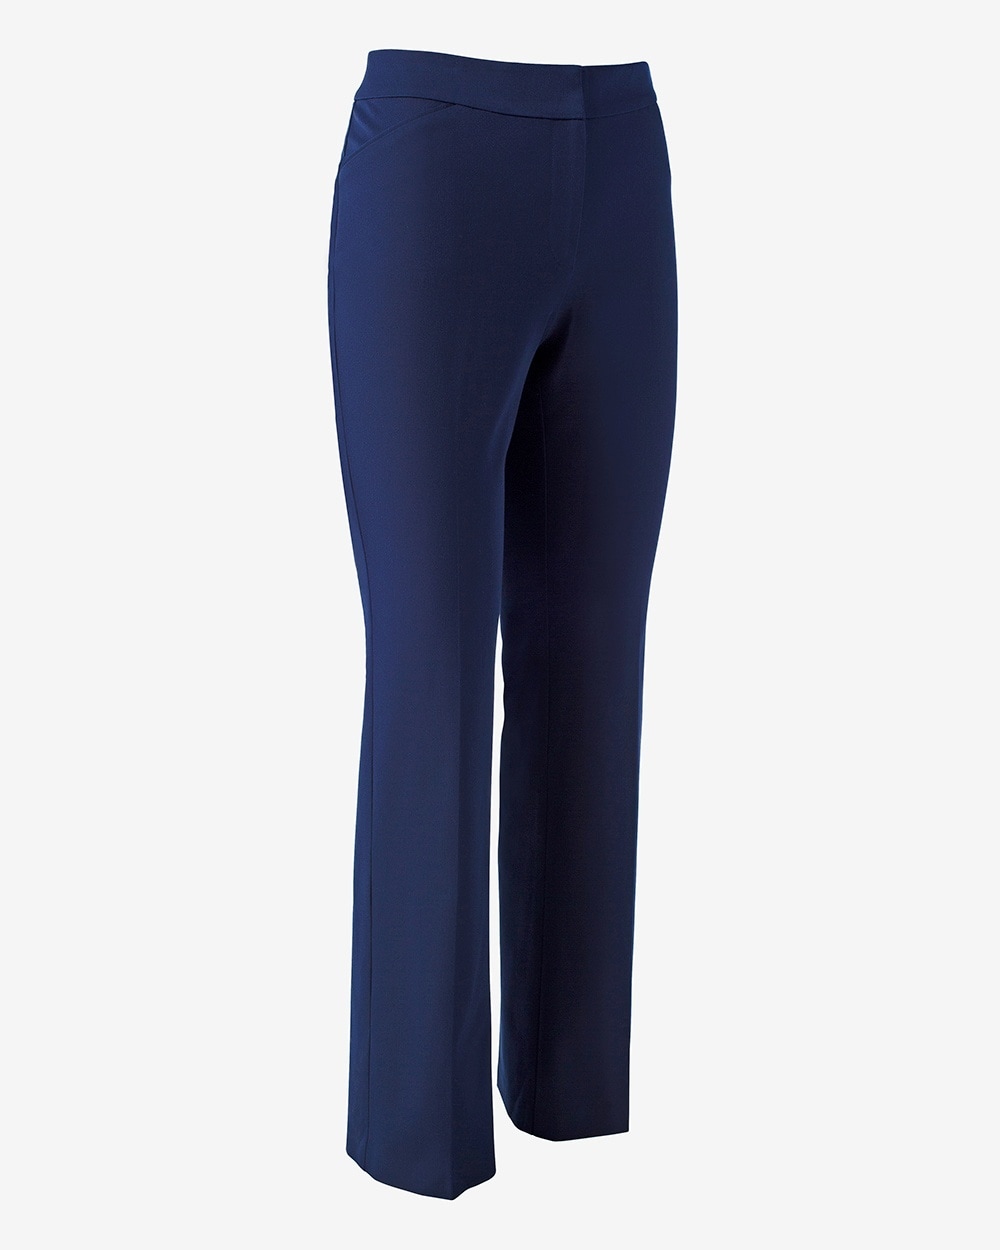 Fabulously Slimming 4-Way Stretch Trouser Pants